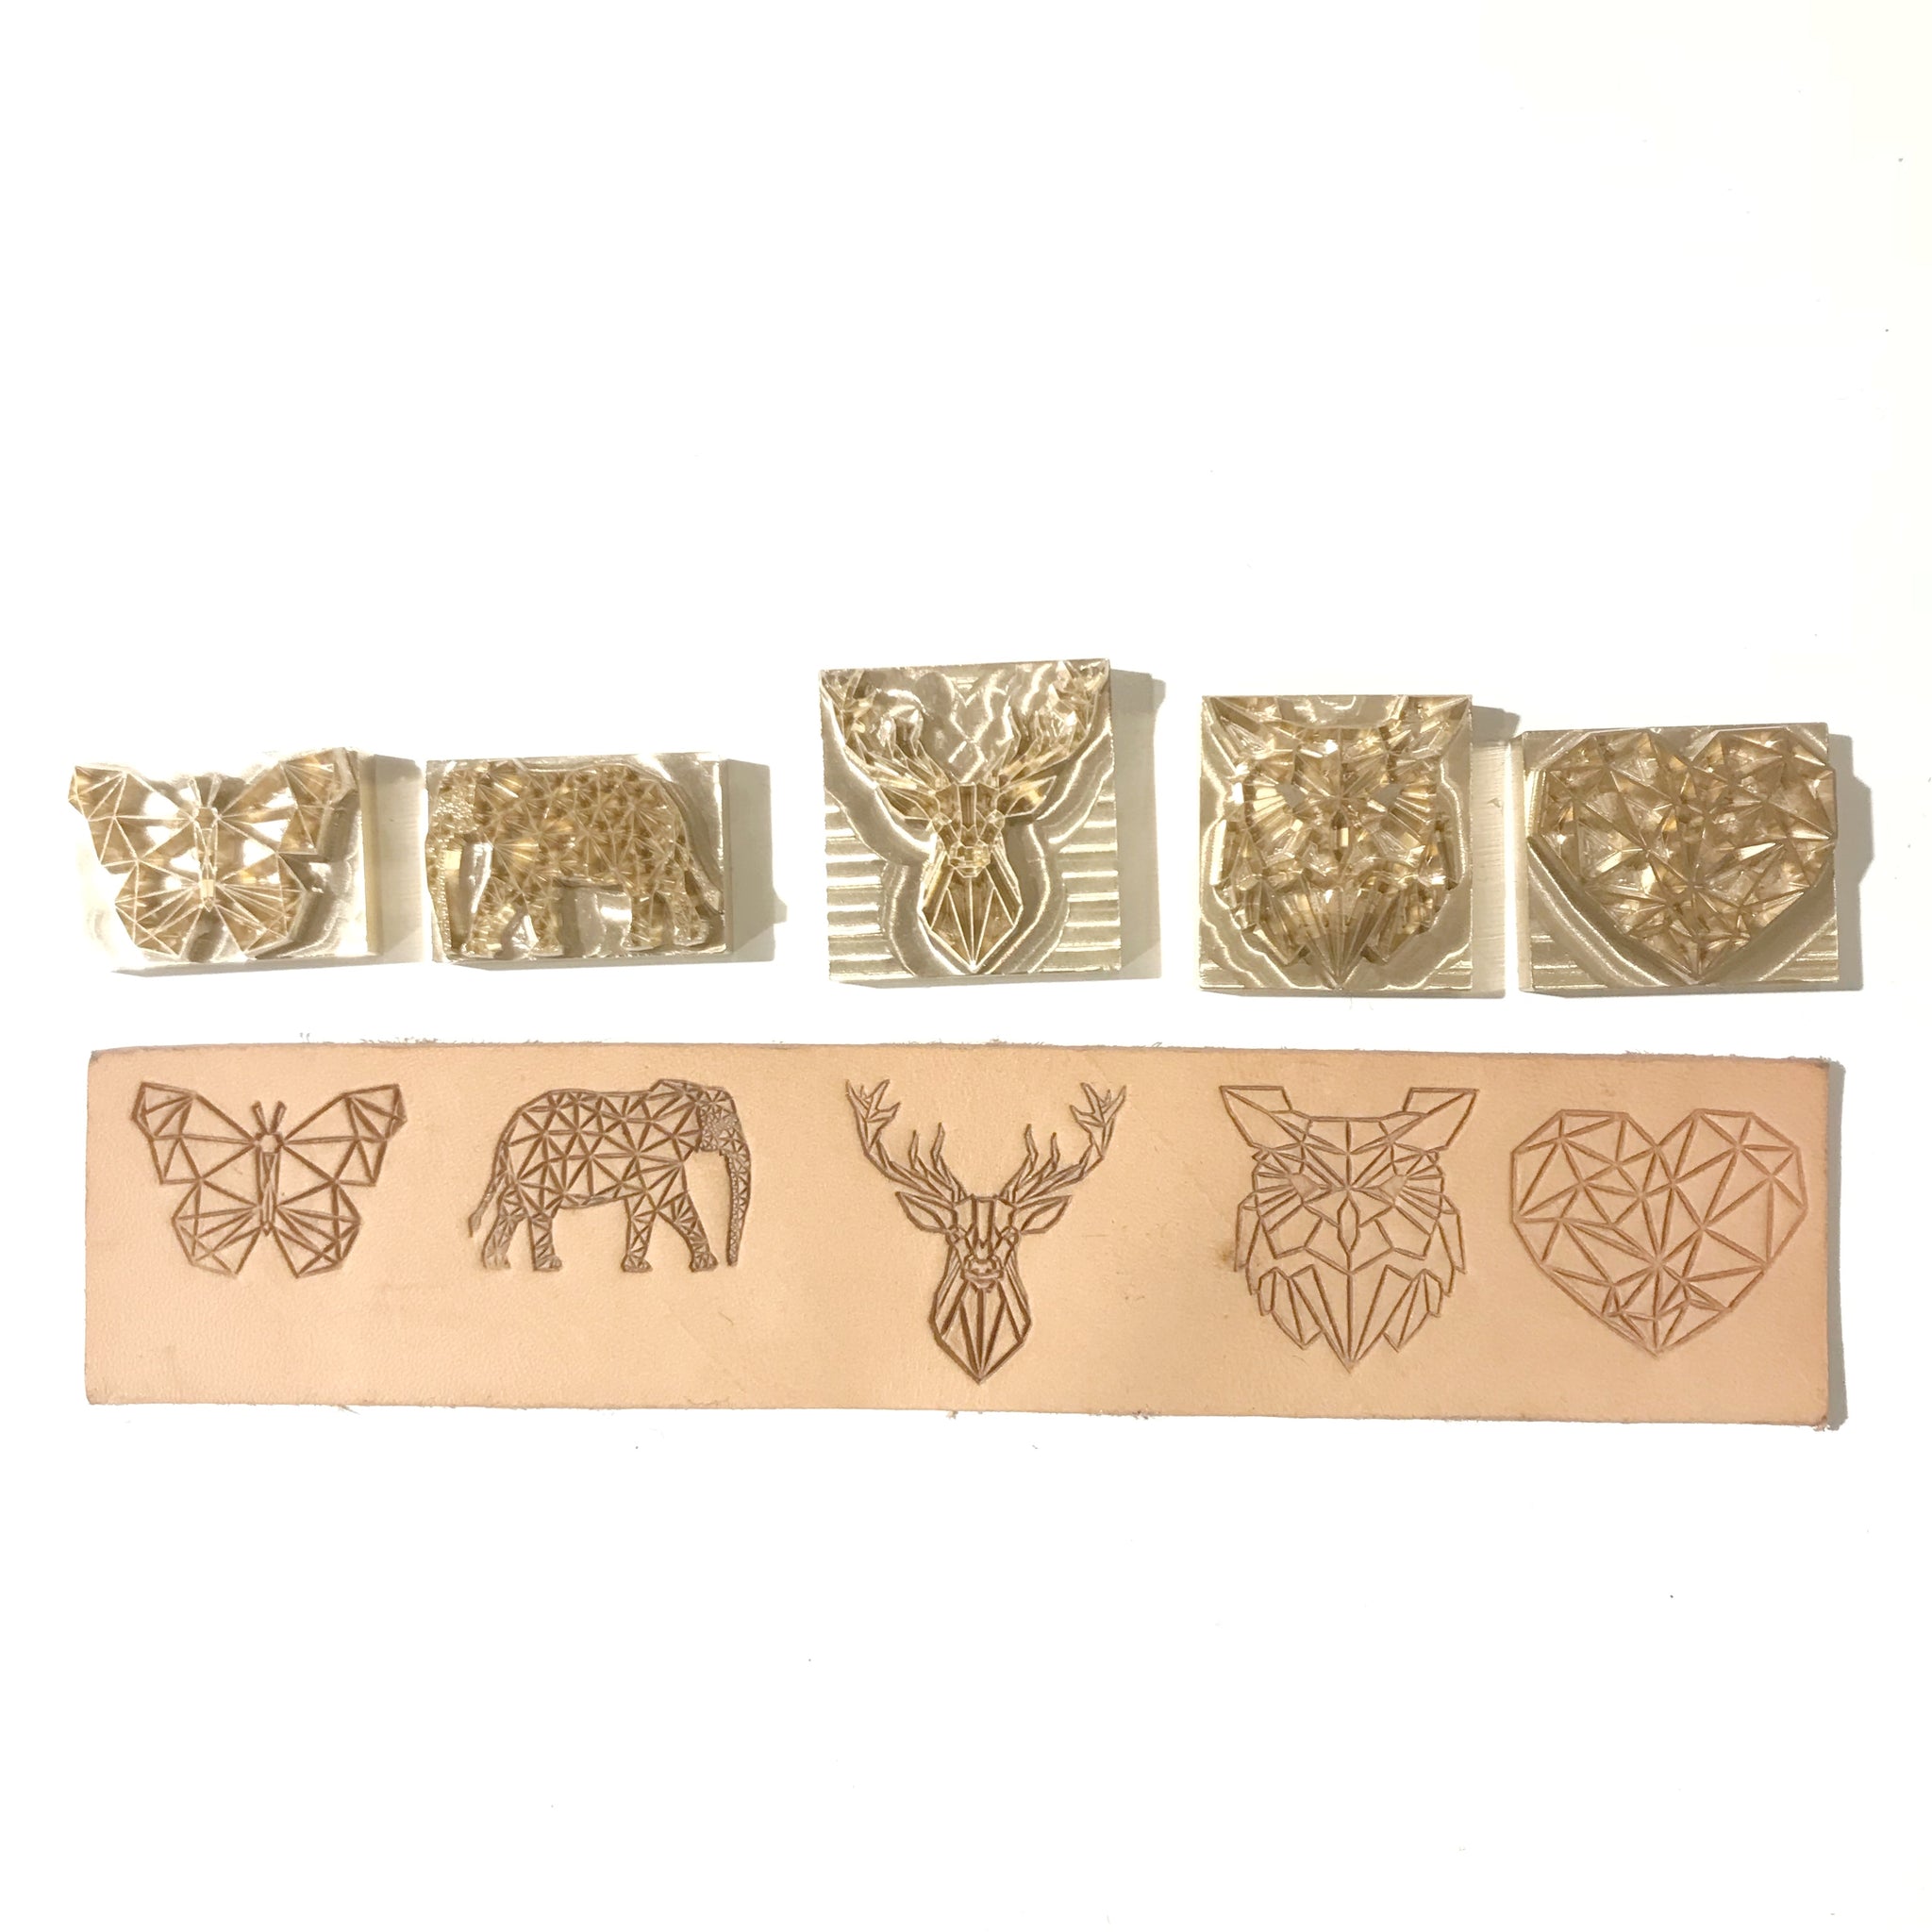 Custom Leather Stamps - Arts & Crafts - San Francisco, California